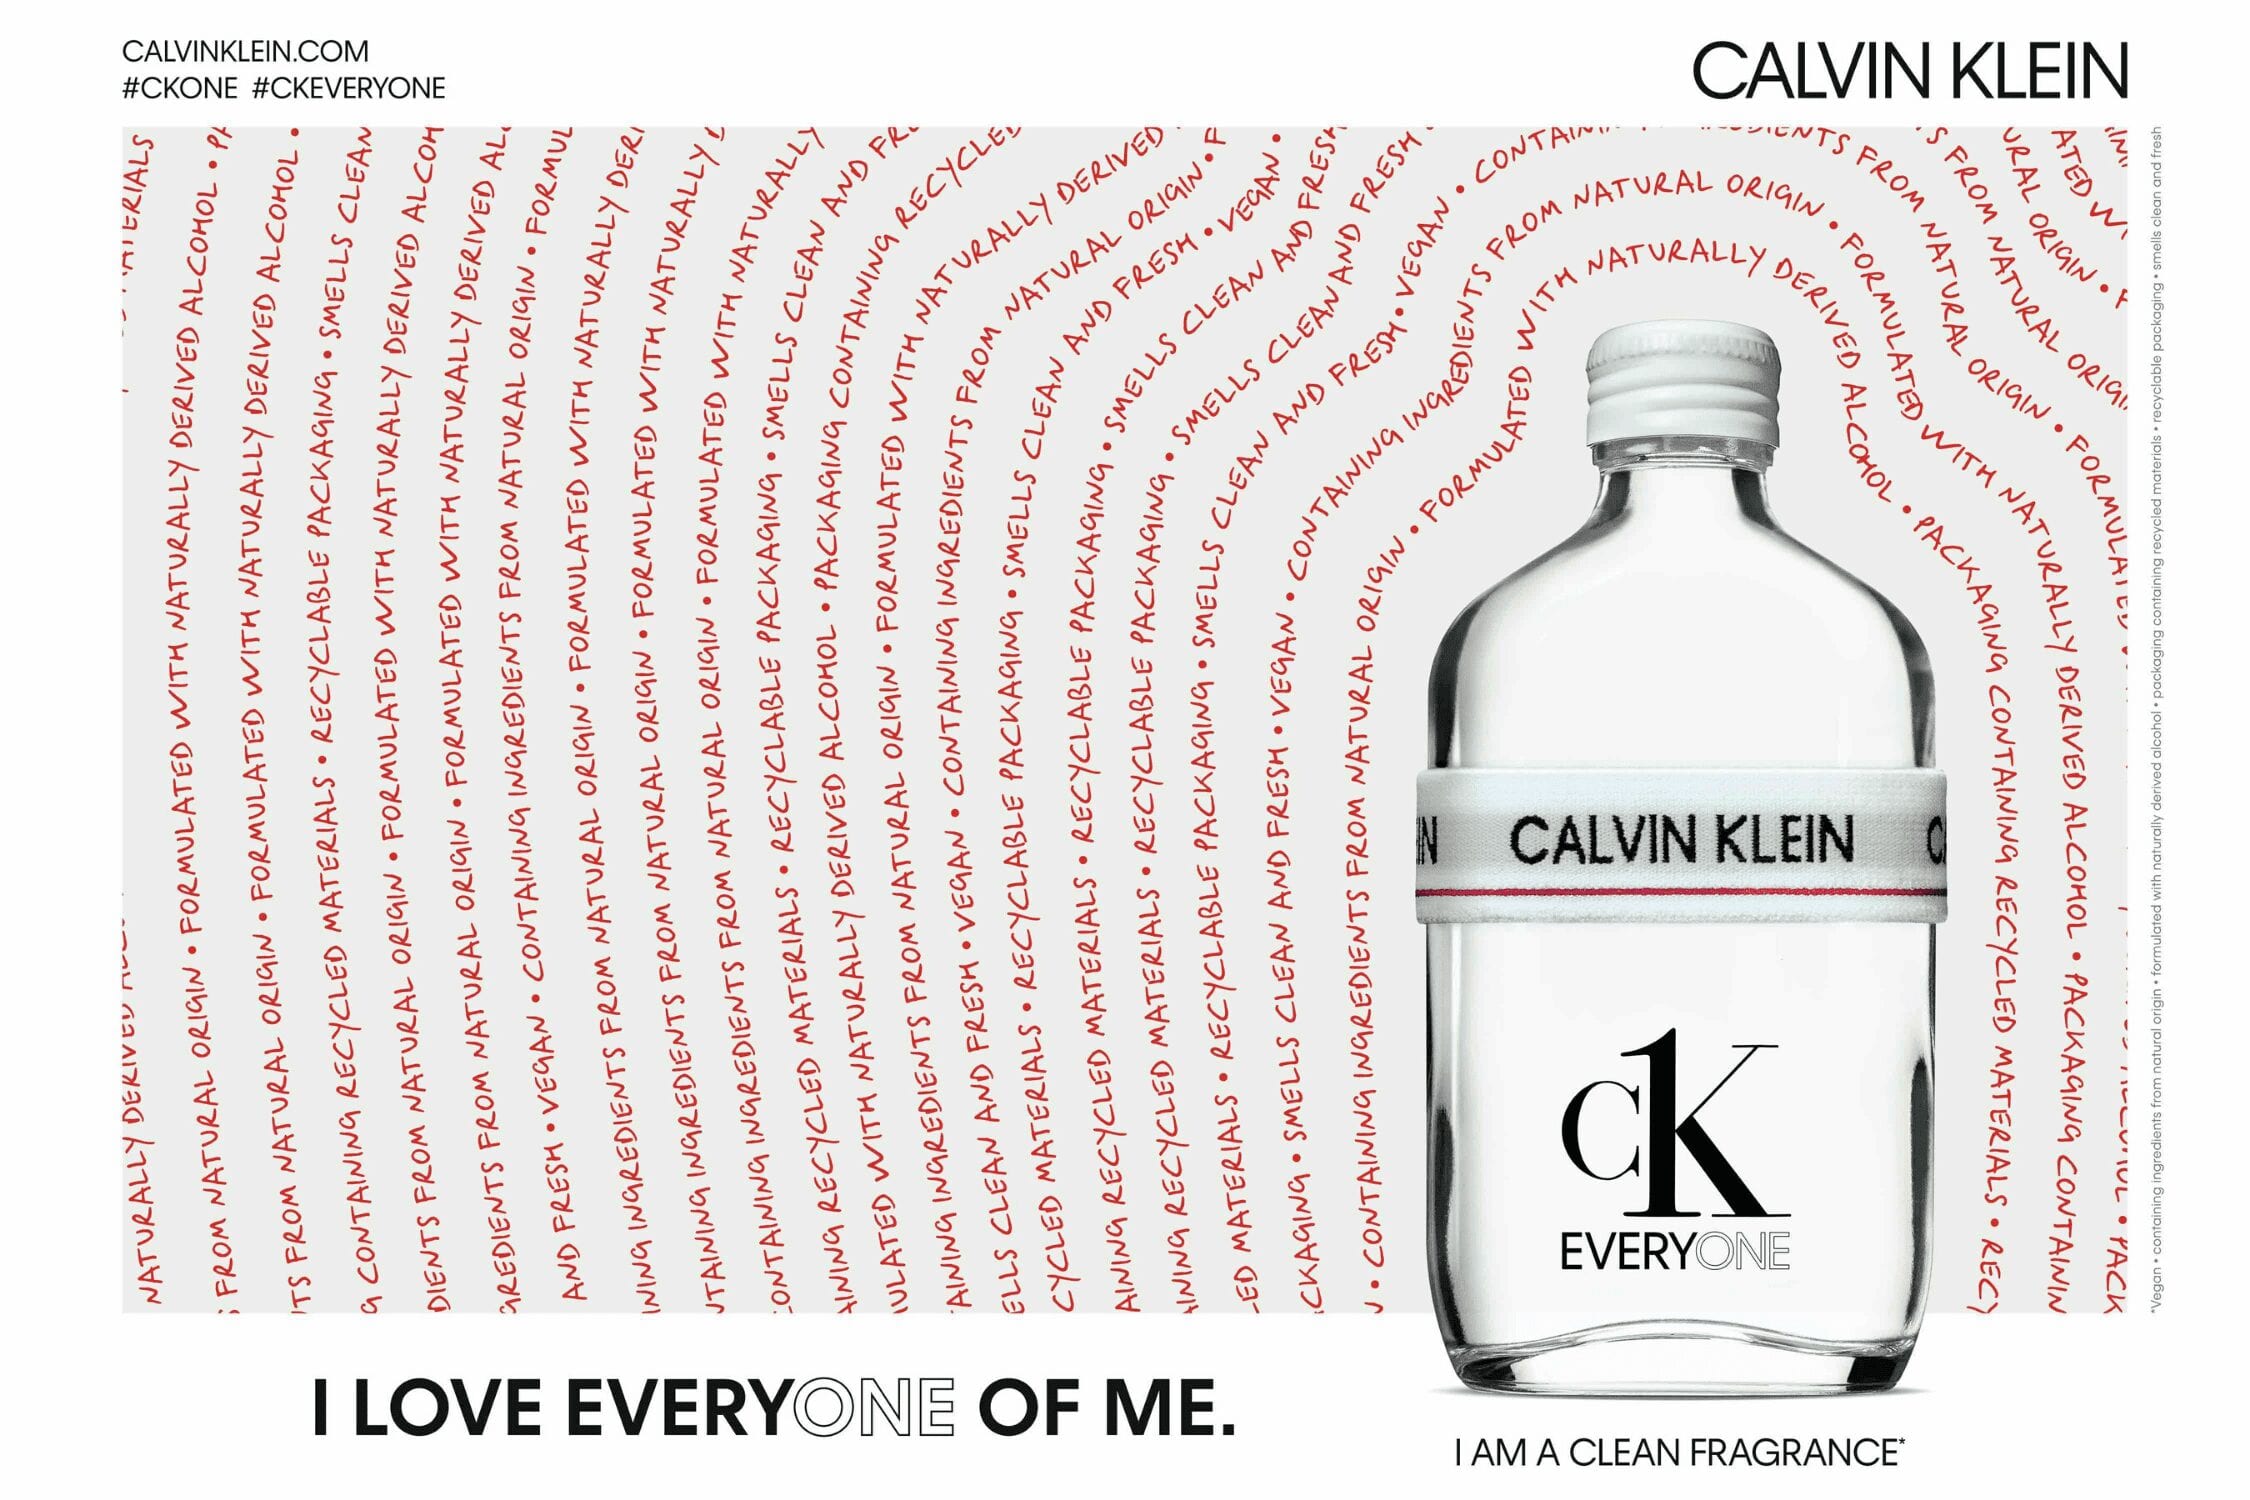 Coty Achieves Silver Level Material Health Certificate for Calvin Klein  Fragrance Assessed by MBDC - MBDC